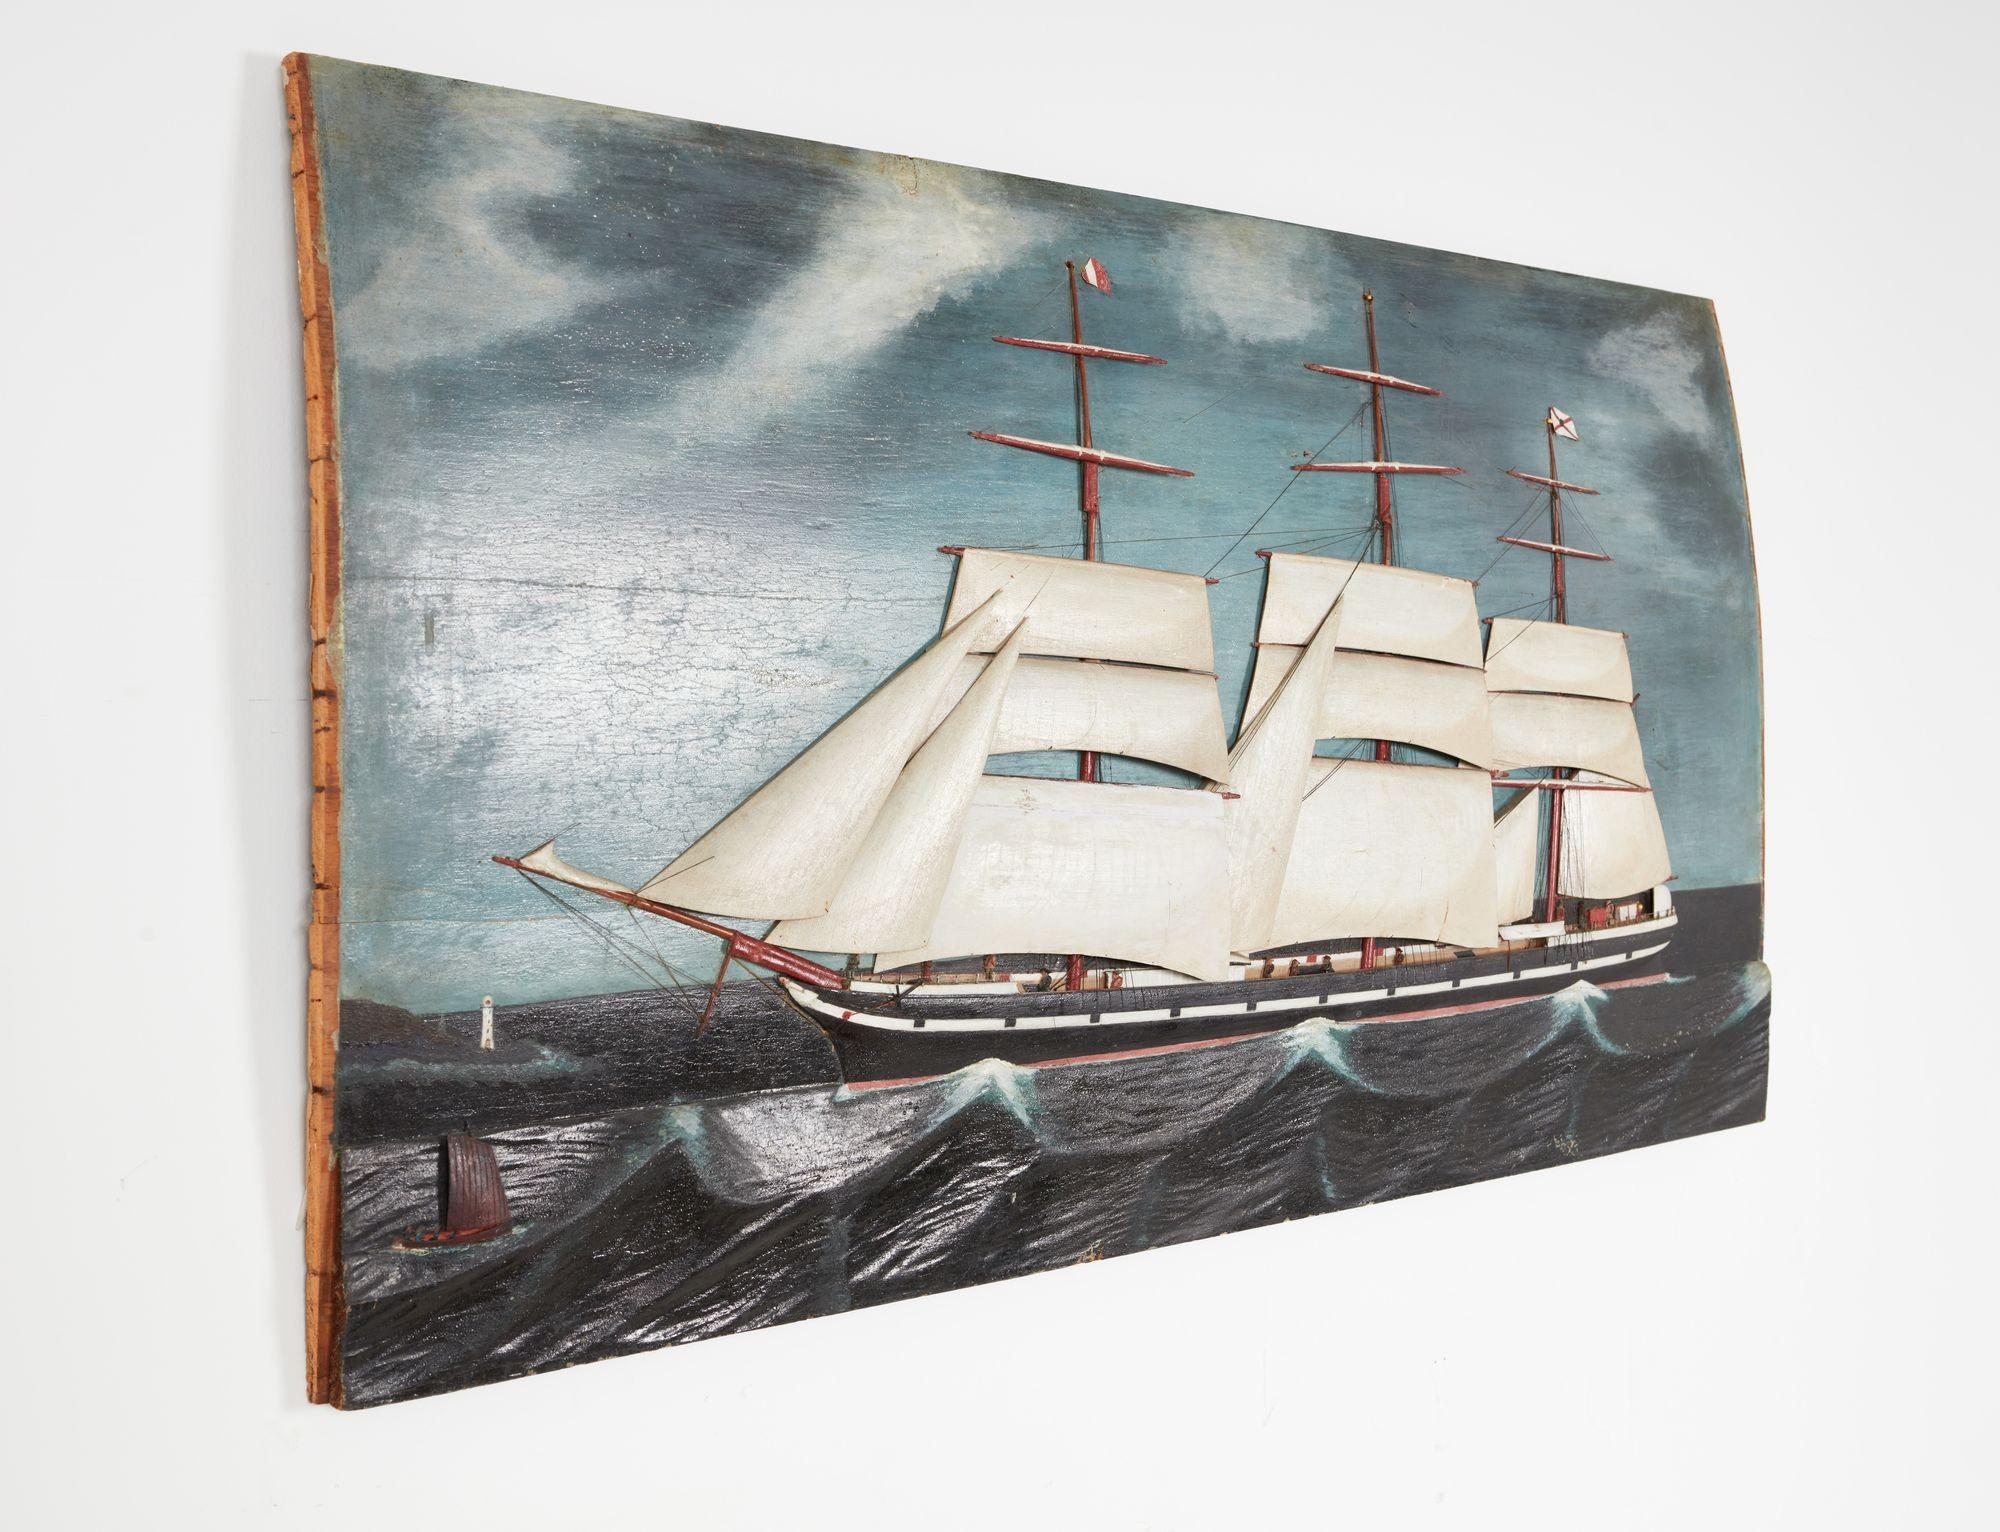 A rare relief carved and painted sailing ship on heavy board depicting a three-masted 26 gun third-class US naval frigate under partially reefed sail nearing a point of land with a lighthouse, showing in great detail sailors on board securing